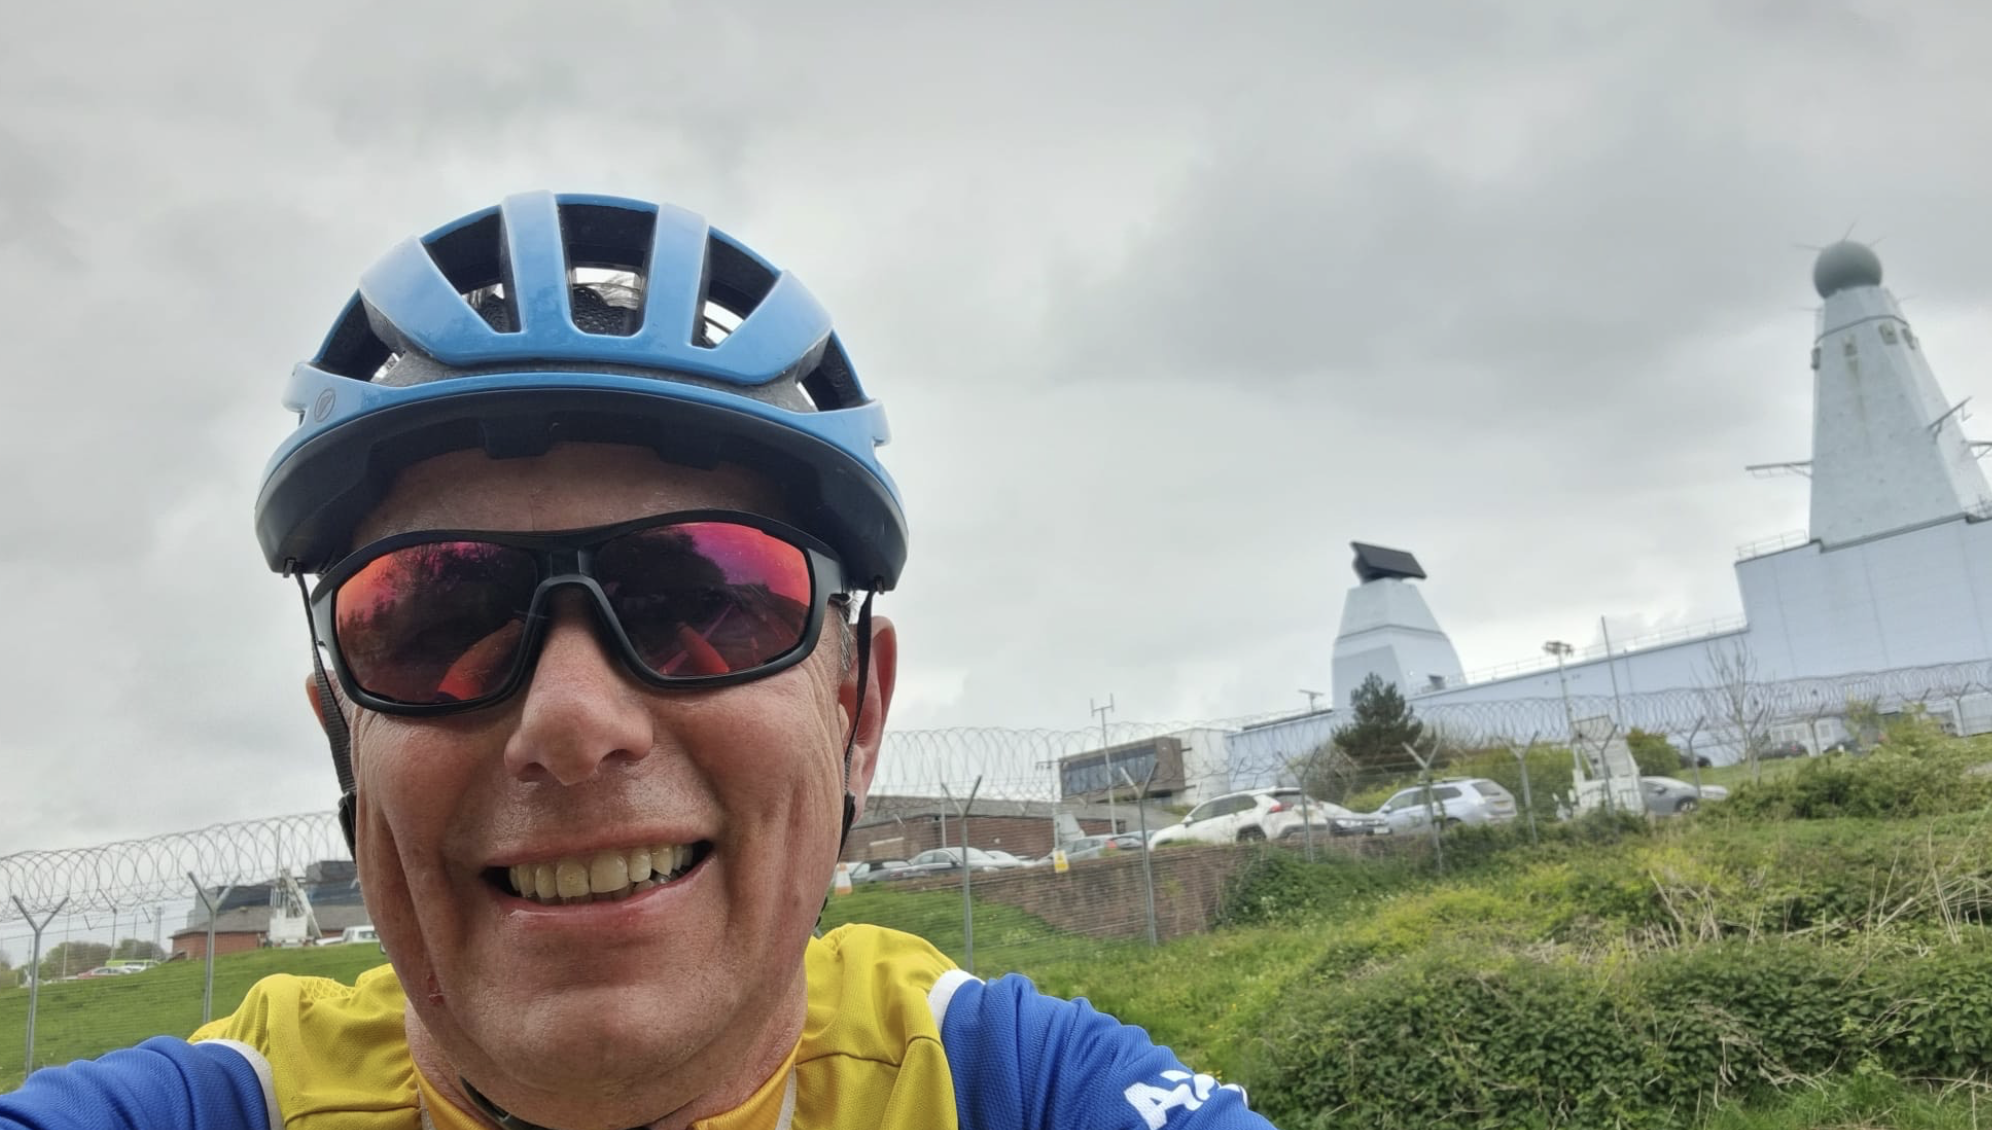 Nick Senechal is a member of the Hitchin Nomads cycling club and is relishing the 400k challenge. PICTURE: Nick en route to Paris this week.